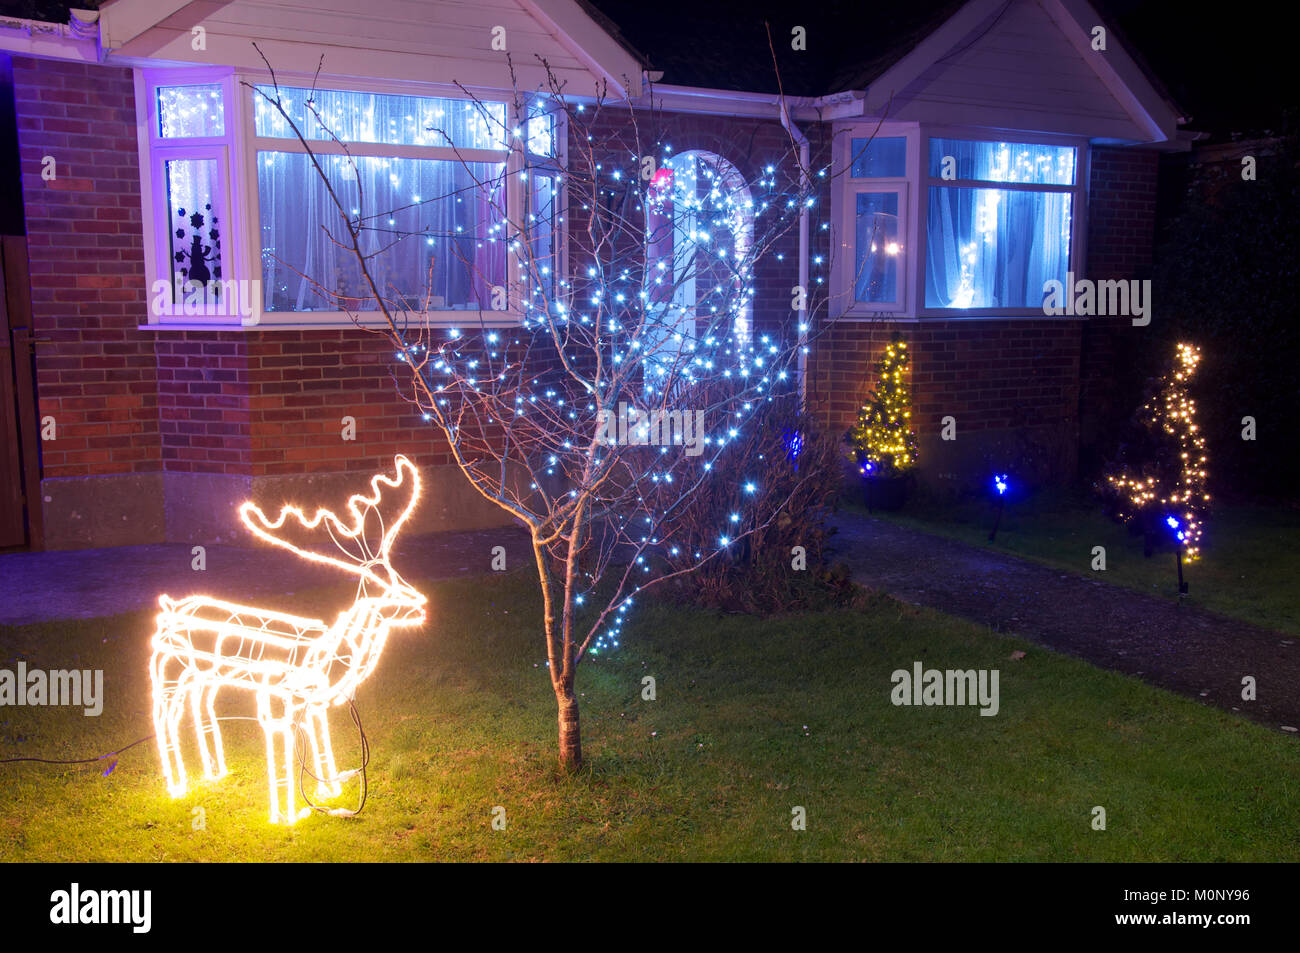 White Christmas lights and an illuminated electric reindeer decorate a tree and front garden of a suburban bungalow. Weymouth, England, United kingdom Stock Photo